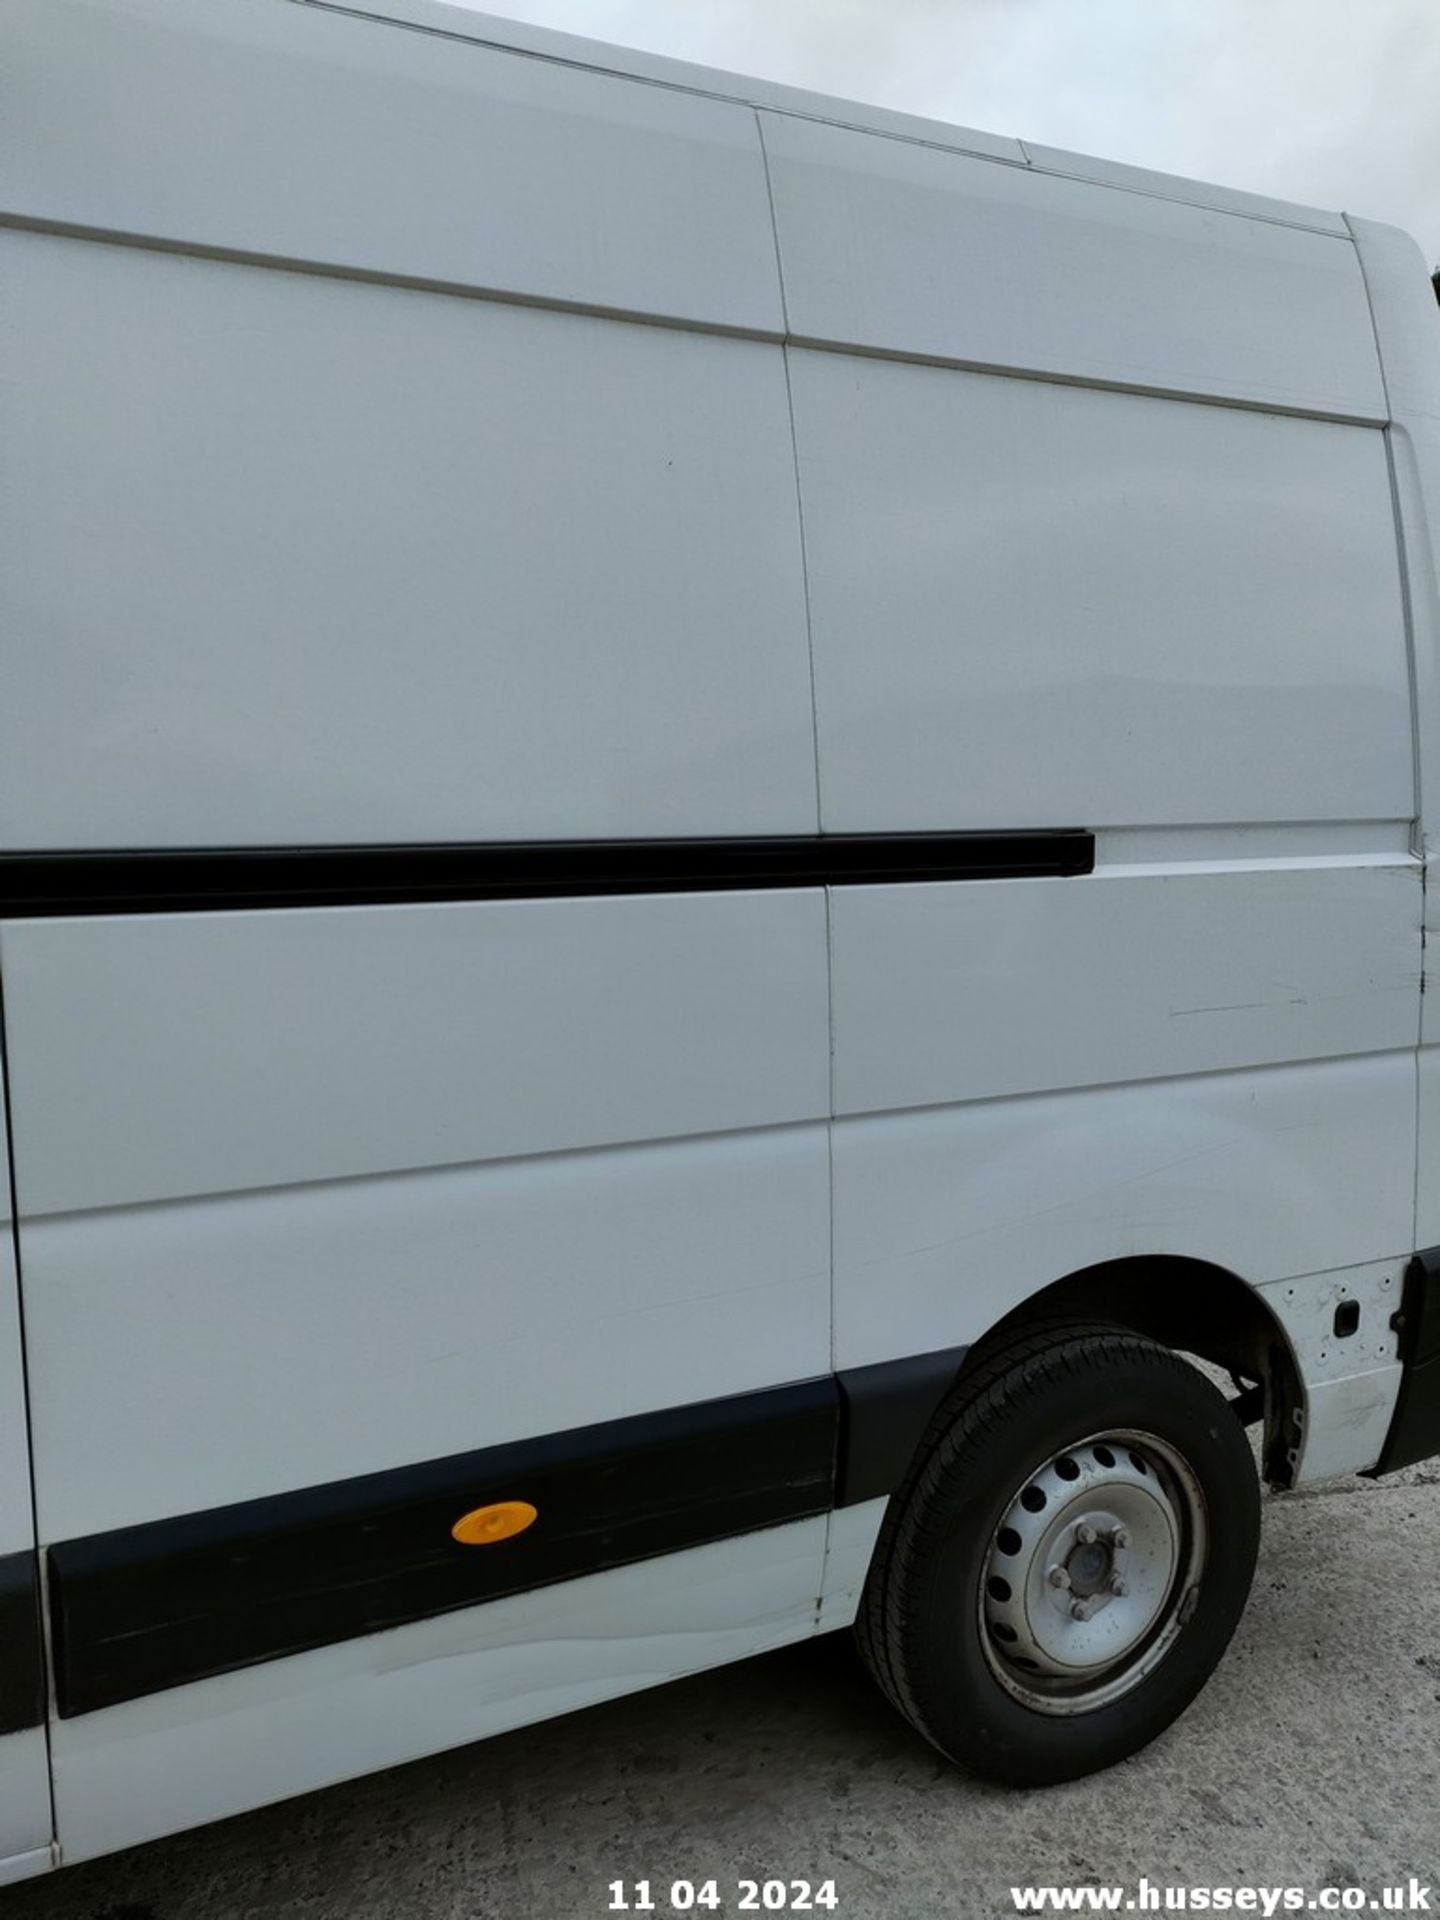 18/68 RENAULT MASTER LM35 BUSINESS DCI - 2298cc 5dr Van (White) - Image 29 of 68